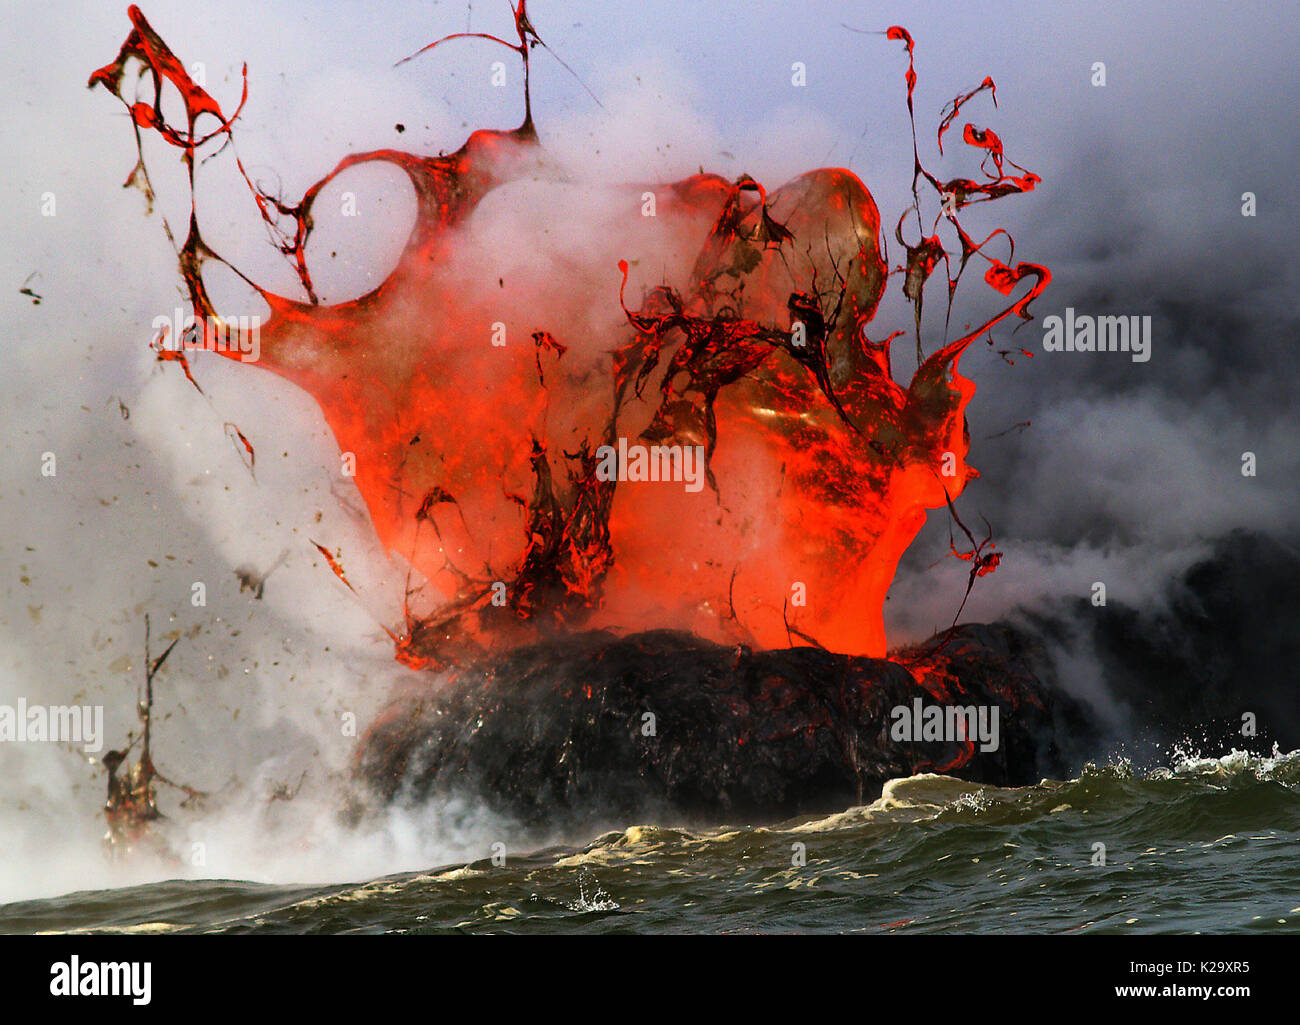 Big Island, Hawaii, USA. 25th Mar, 2006. Molten lava from the Kilauea Volcano explodes as it reaches the Pacific Ocean, the extreme temperature difference causing the dramatic reaction about Kalapana, Hawaii. Credit: L.E. Baskow/ZUMA Wire/Alamy Live News Stock Photo